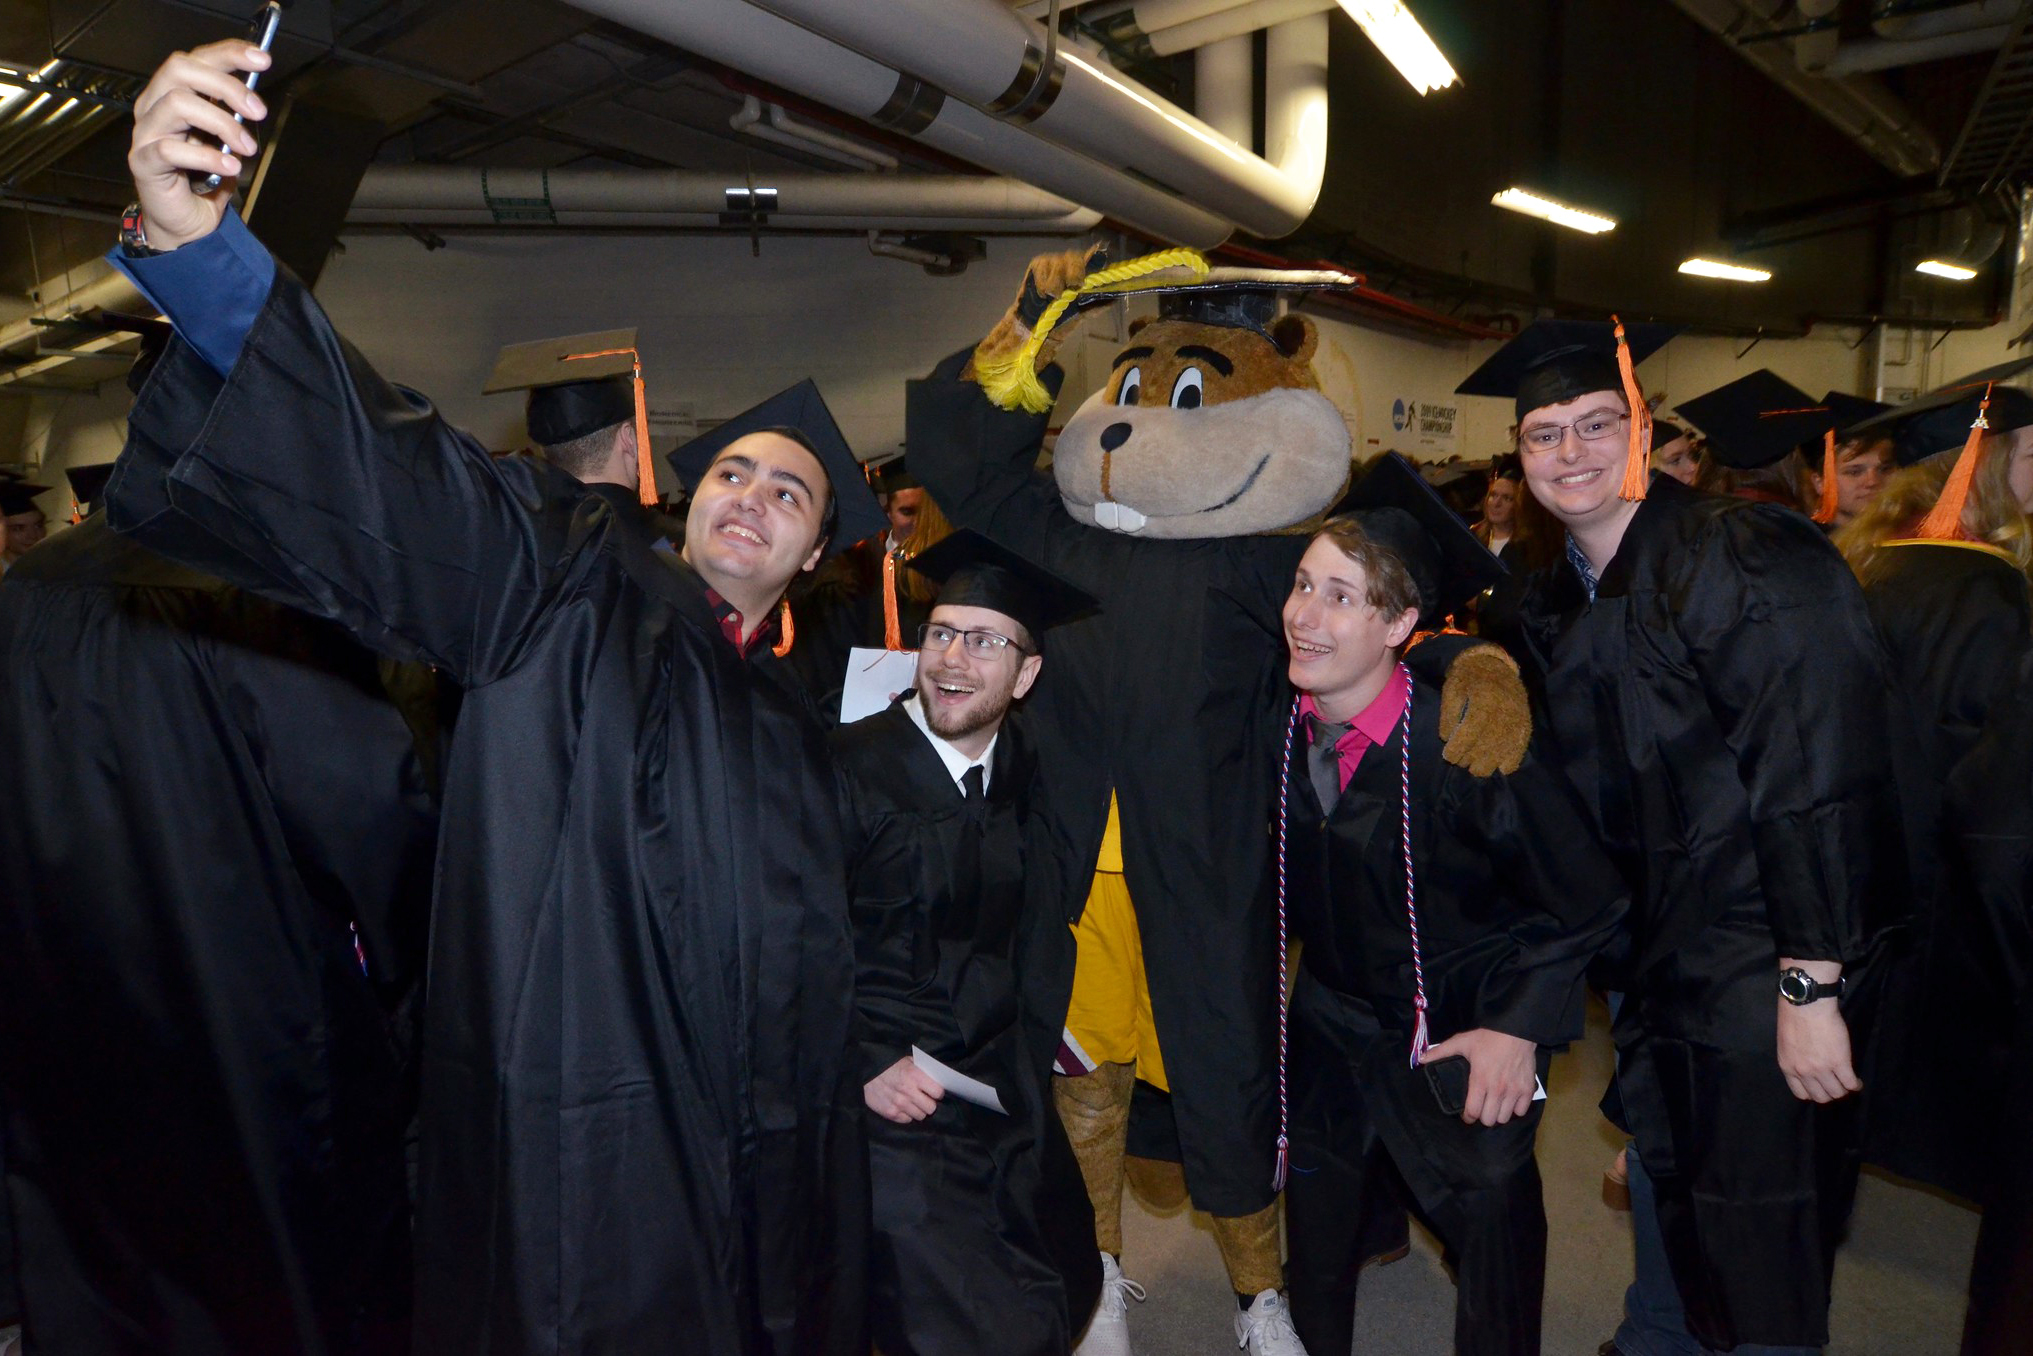 Four students posing for a photo at graduation with Goldy Gopher.